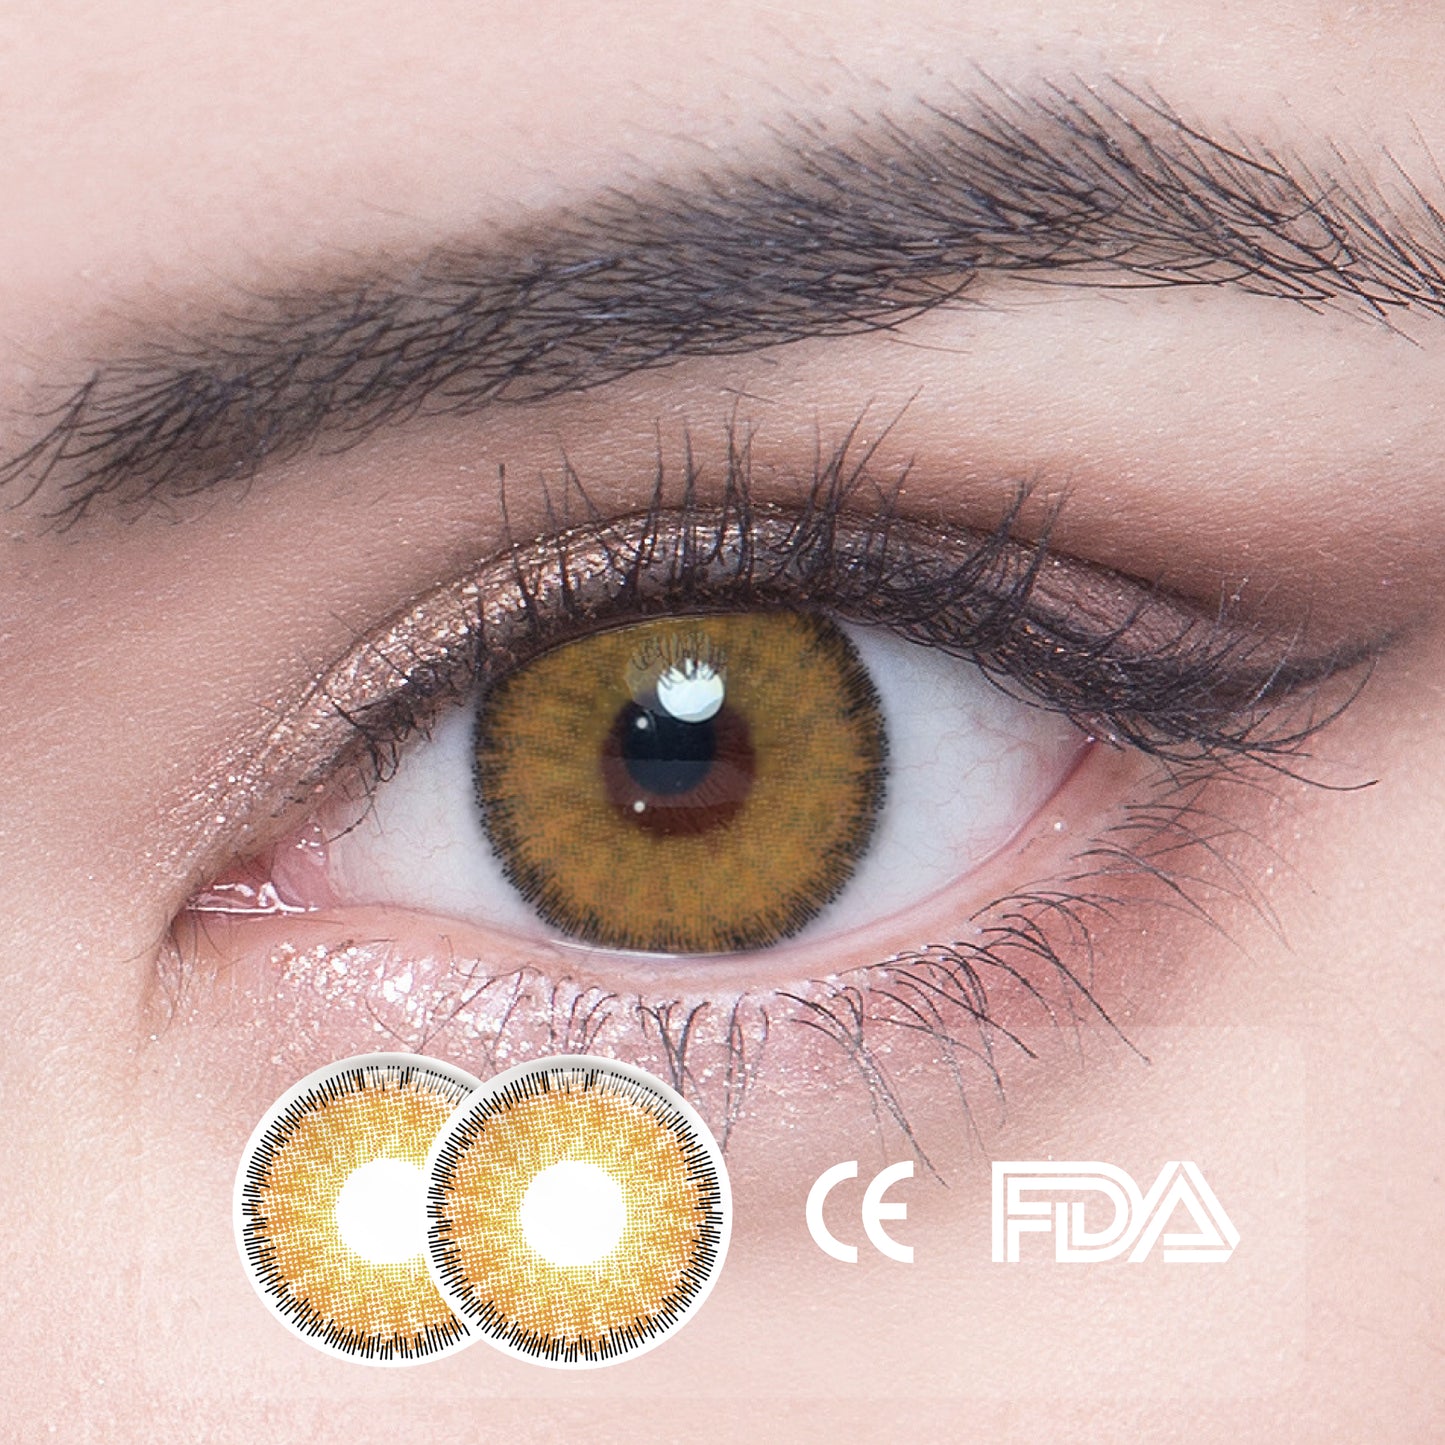 1Pcs FDA Certificate Eyes Colorful Contact Lenses - Dazzle gold brown